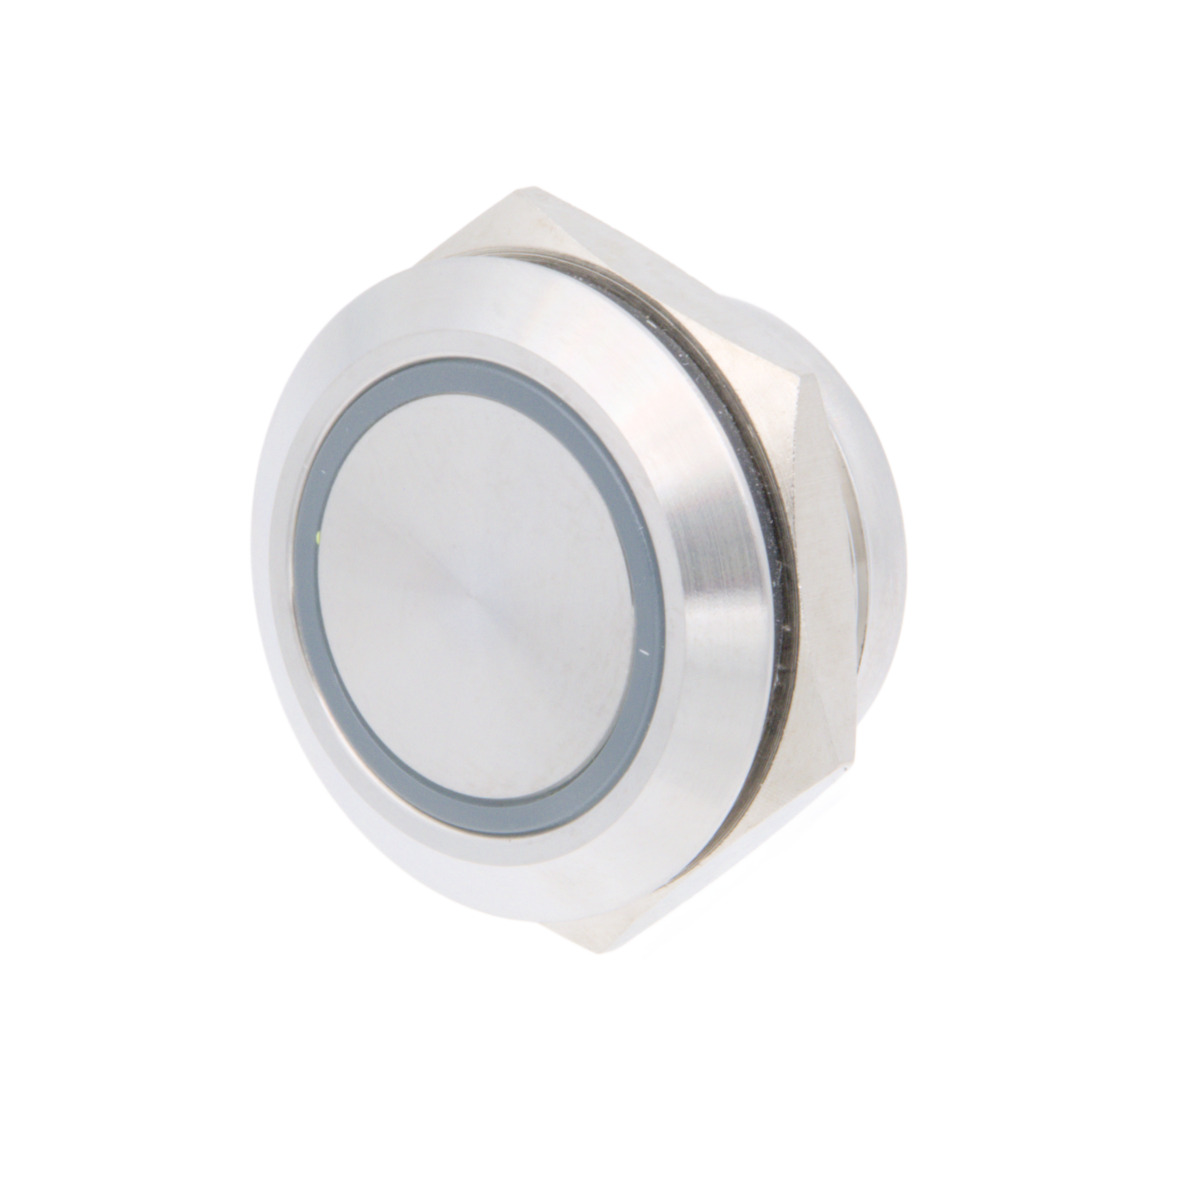 Ø19mm Metal Push Button with Blue LED - 12V, JST-PHR-4 Connection